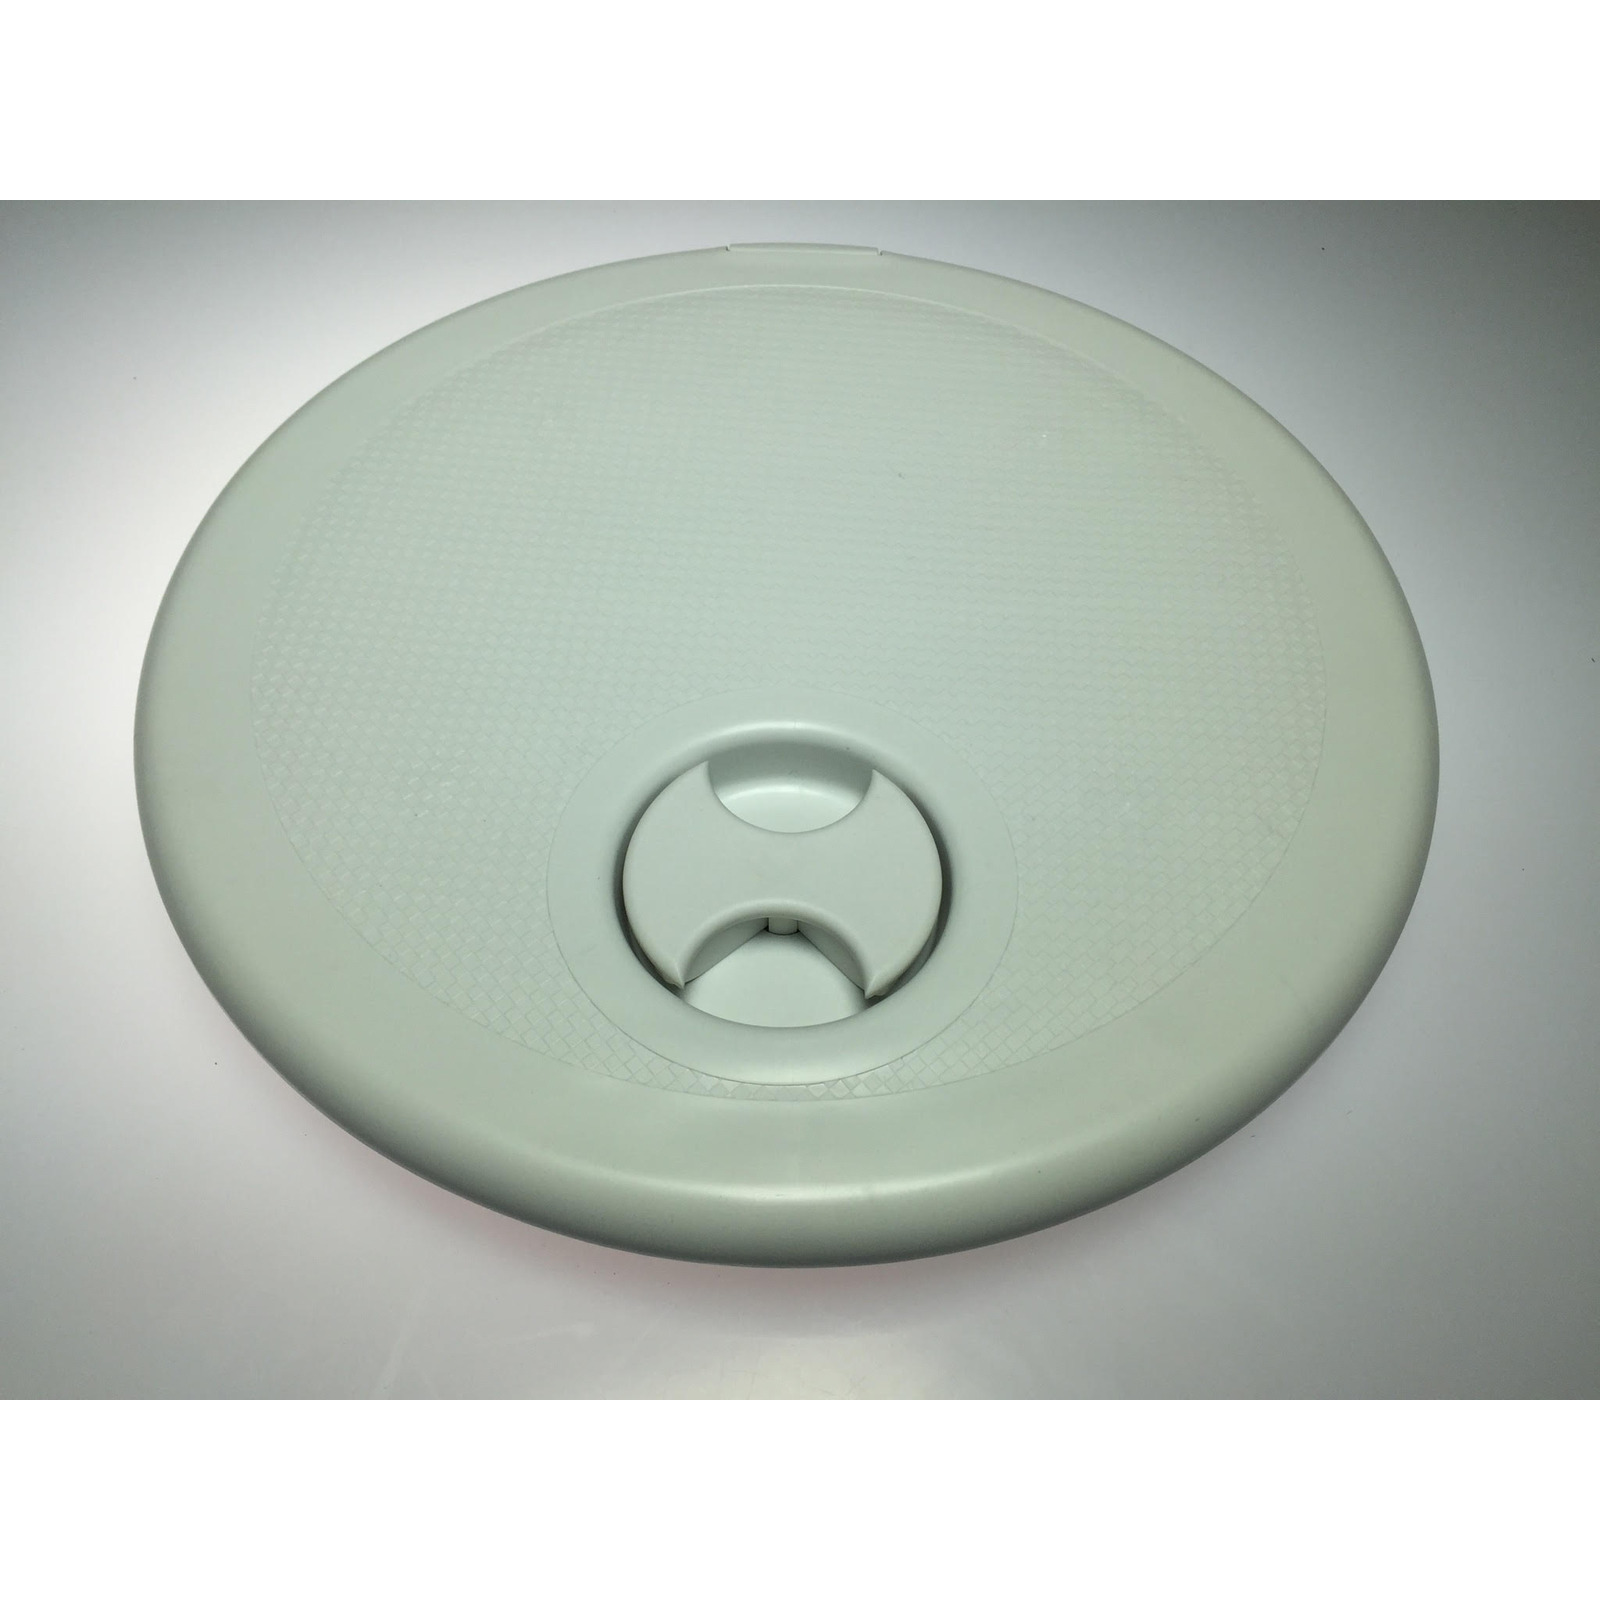 Round Hinged Access Hatch Inspection Port Large 334mm